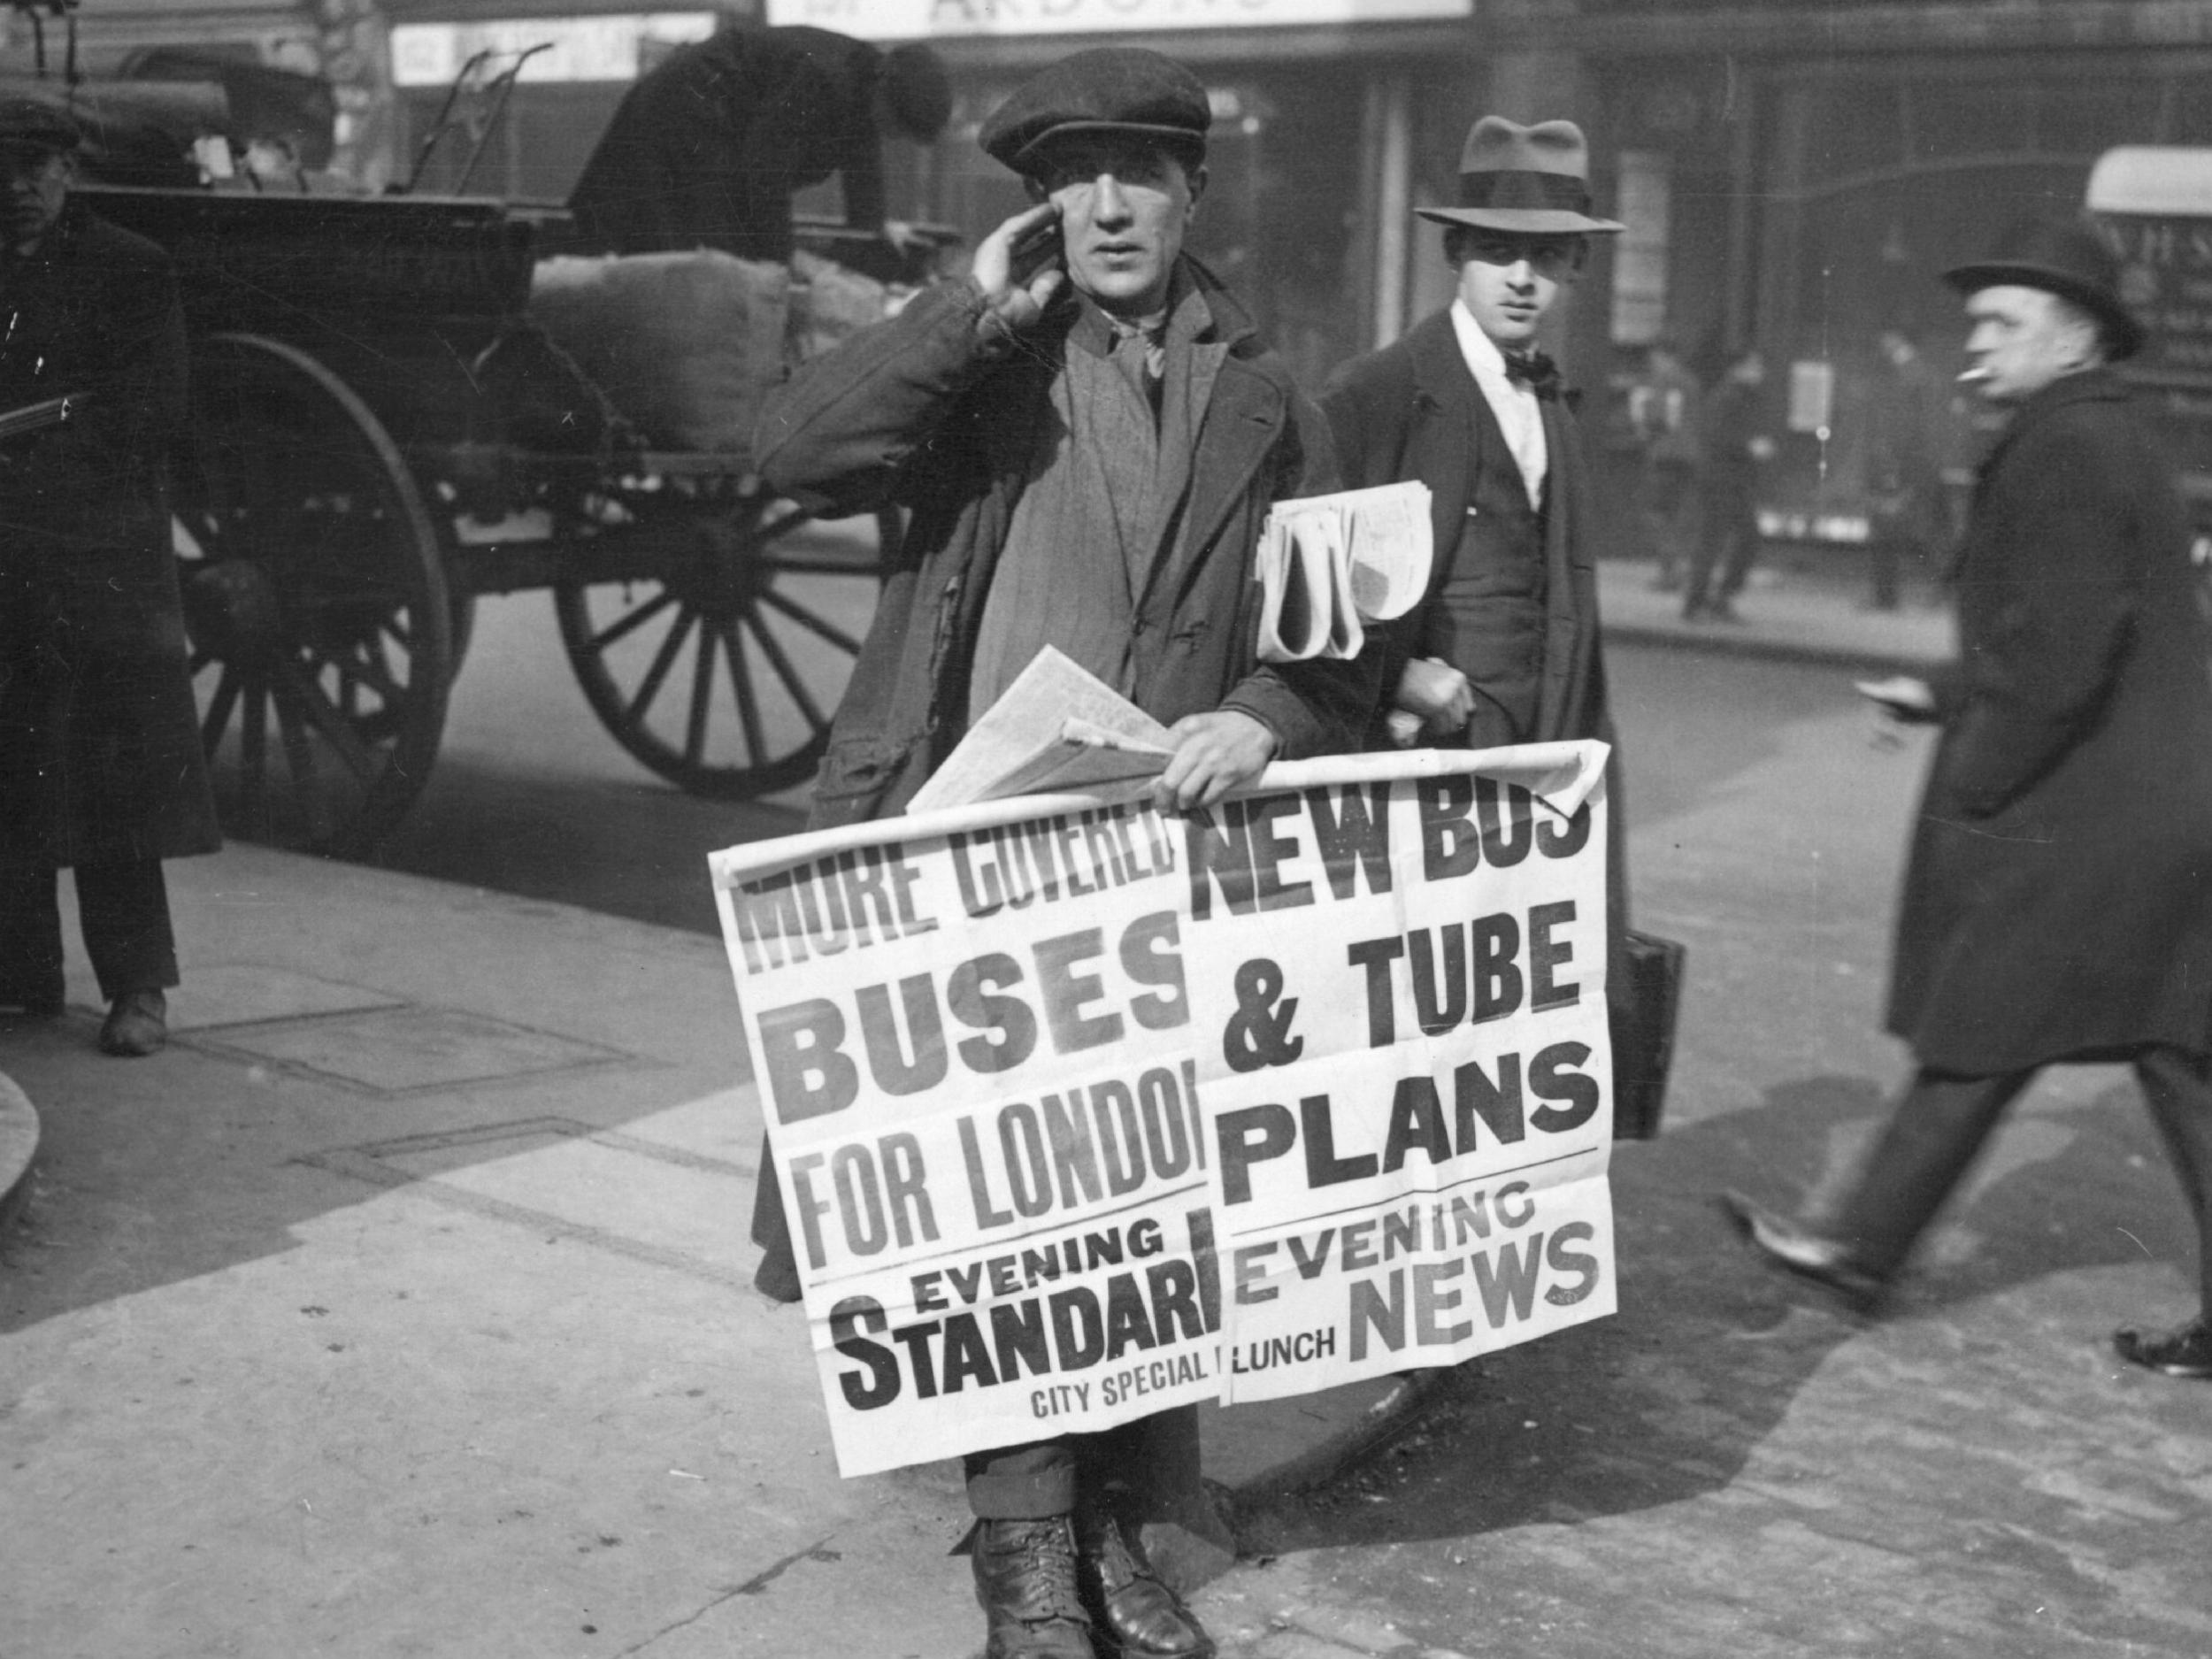 &#13;
An Evening Standard seller in London, 1926: almost a century on the local press remains a key media presence&#13;